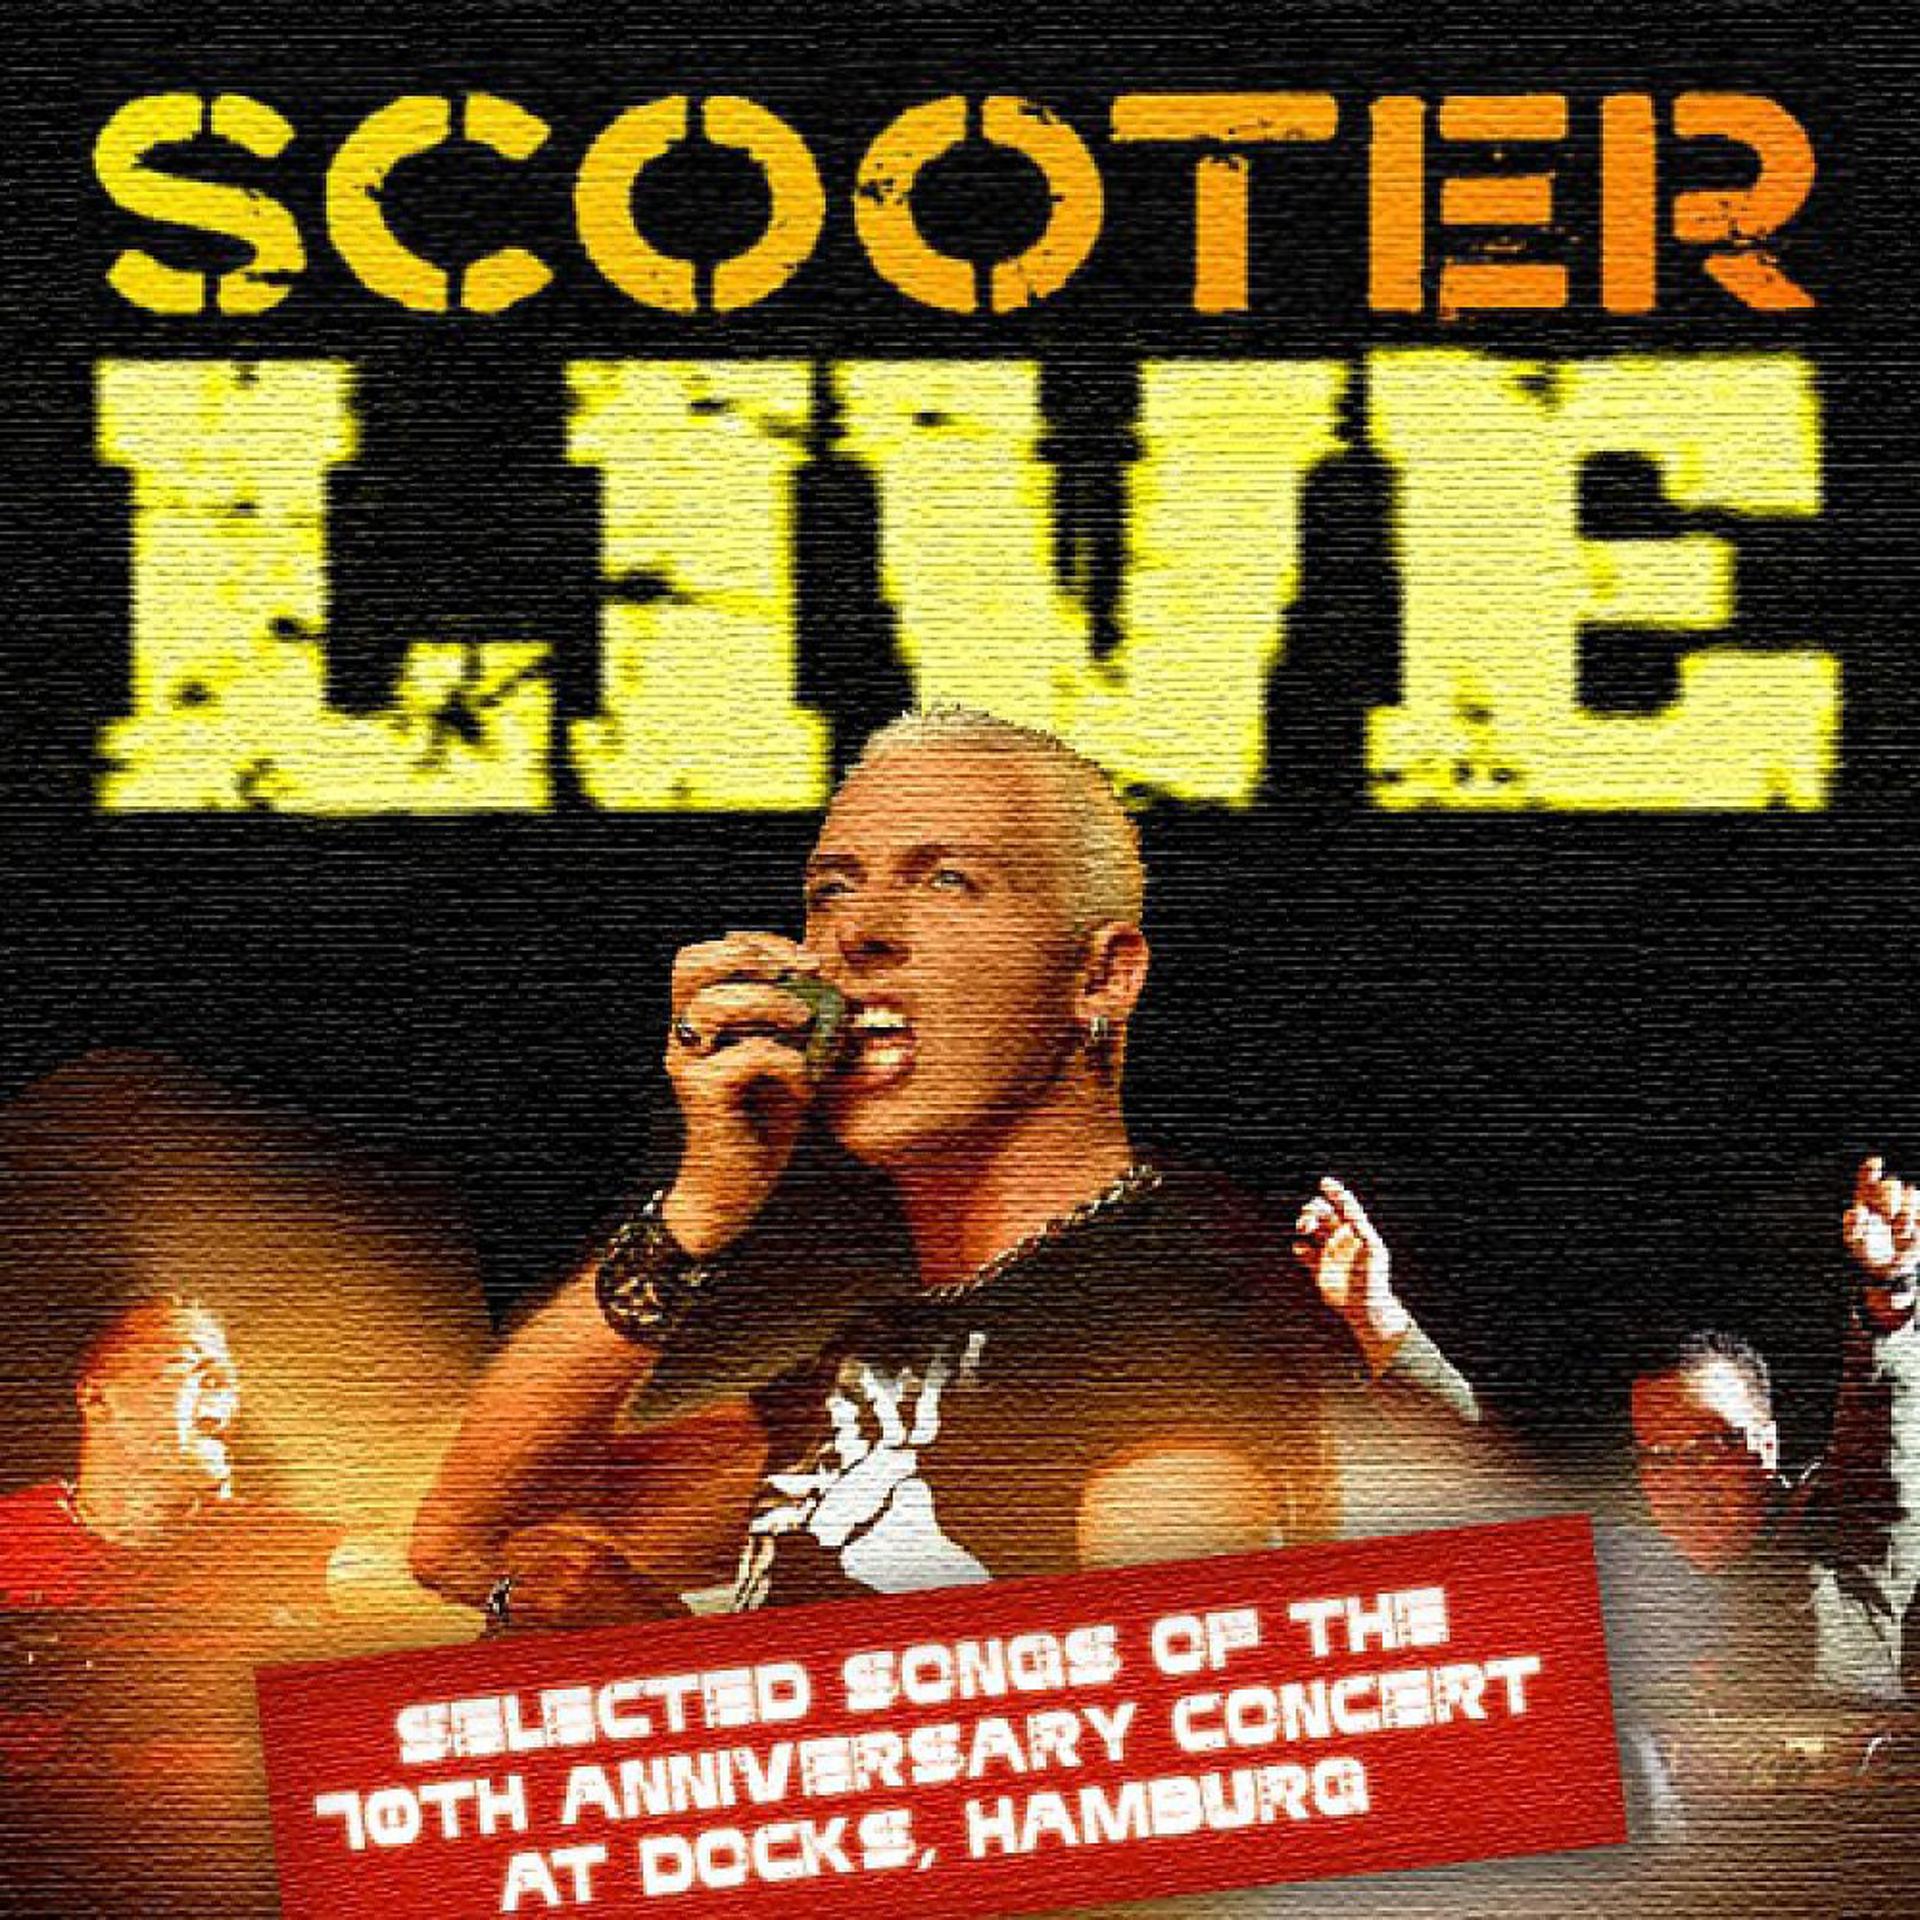 Scooter lets do it again. Scooter 10th Anniversary Concert 2004. Scooter 2002 Live. Scooter Live 1995. Scooter концерты.